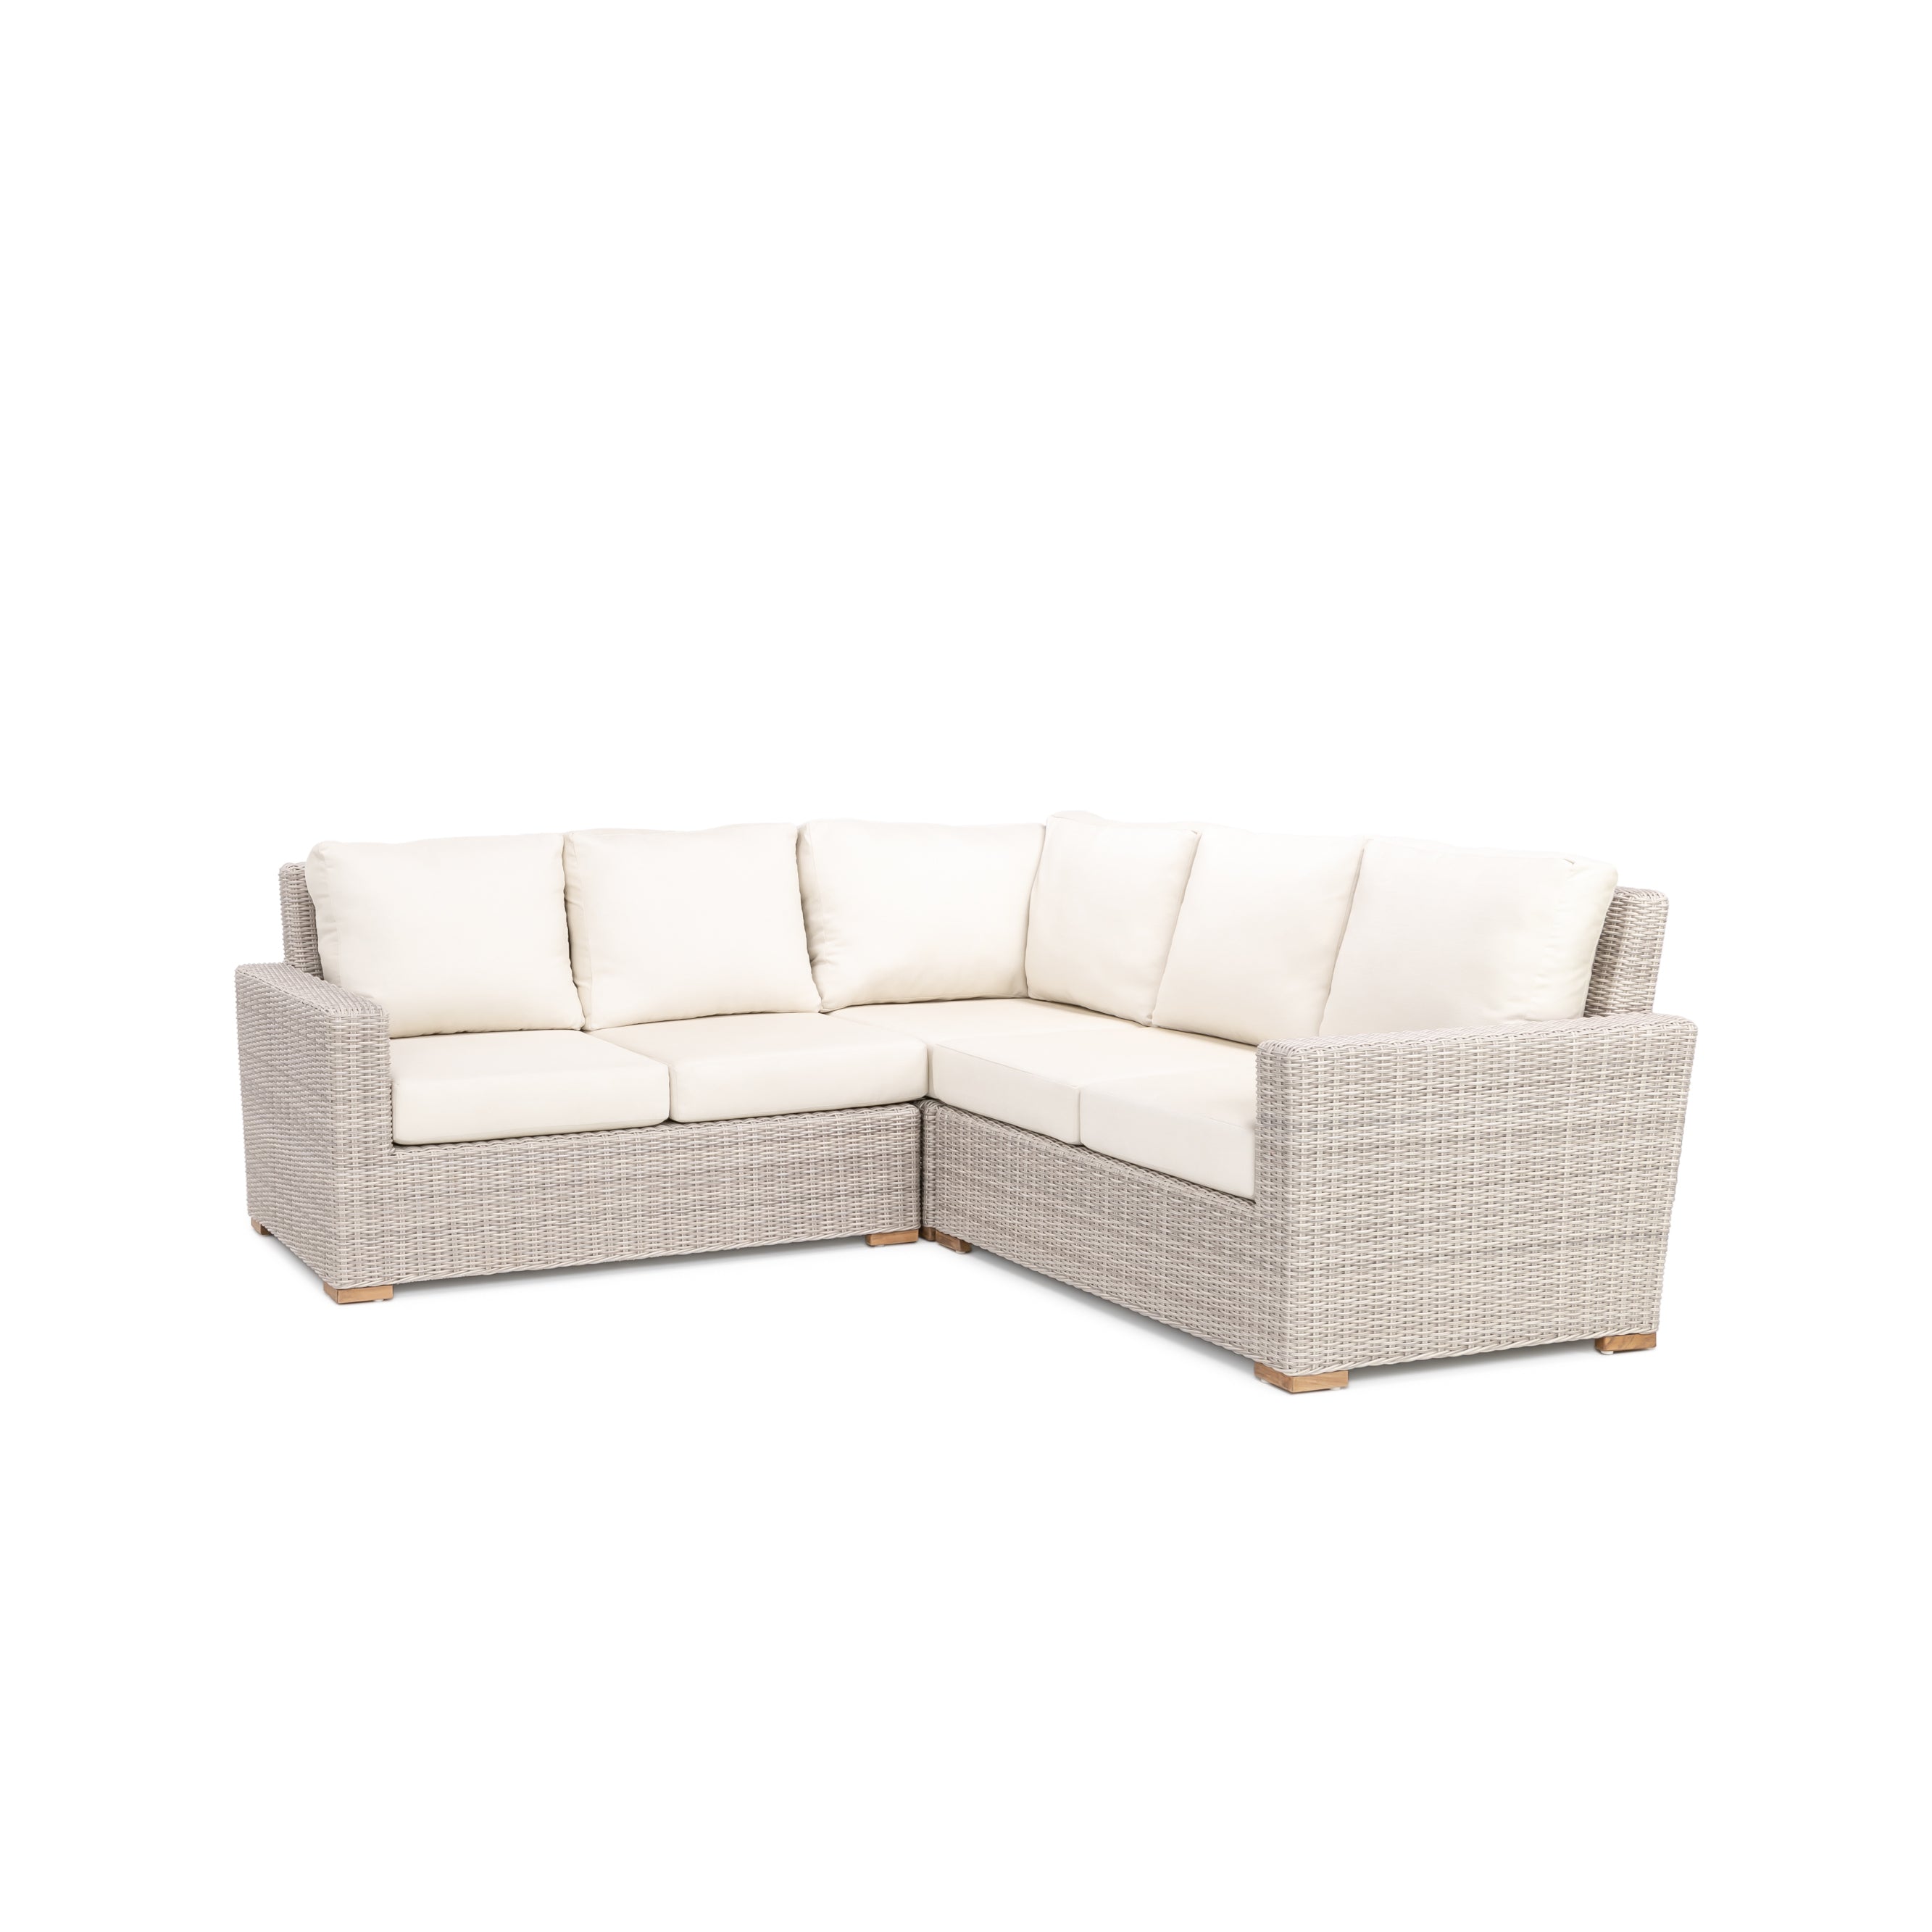 Oyster Bay Sectional